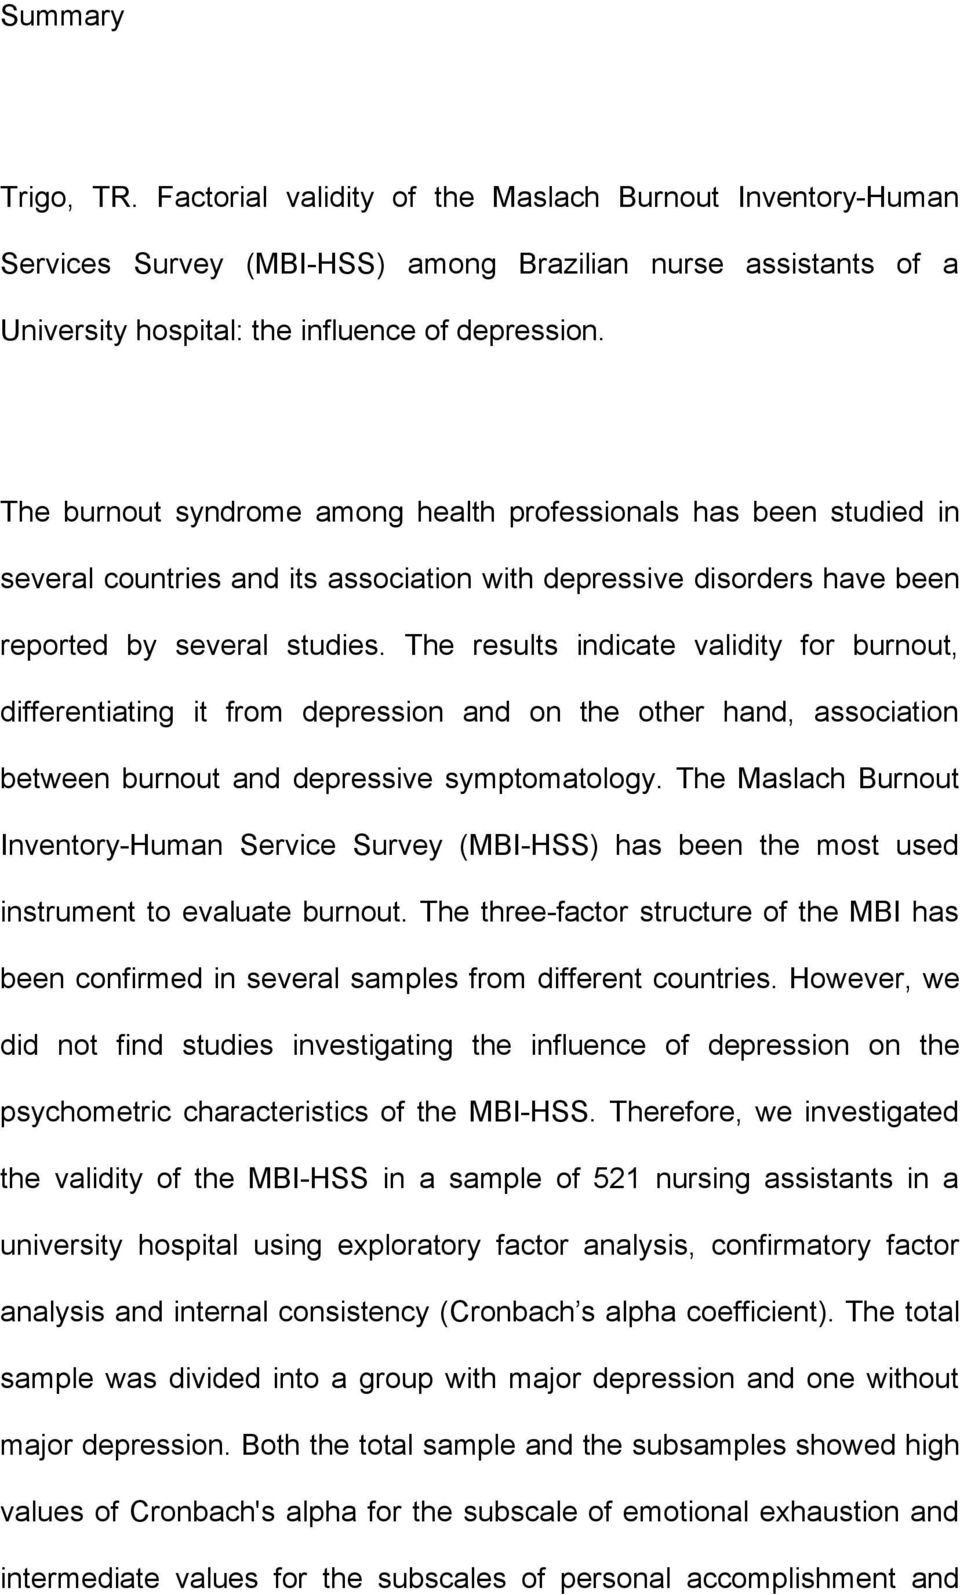 The results indicate validity for burnout, differentiating it from depression and on the other hand, association between burnout and depressive symptomatology.